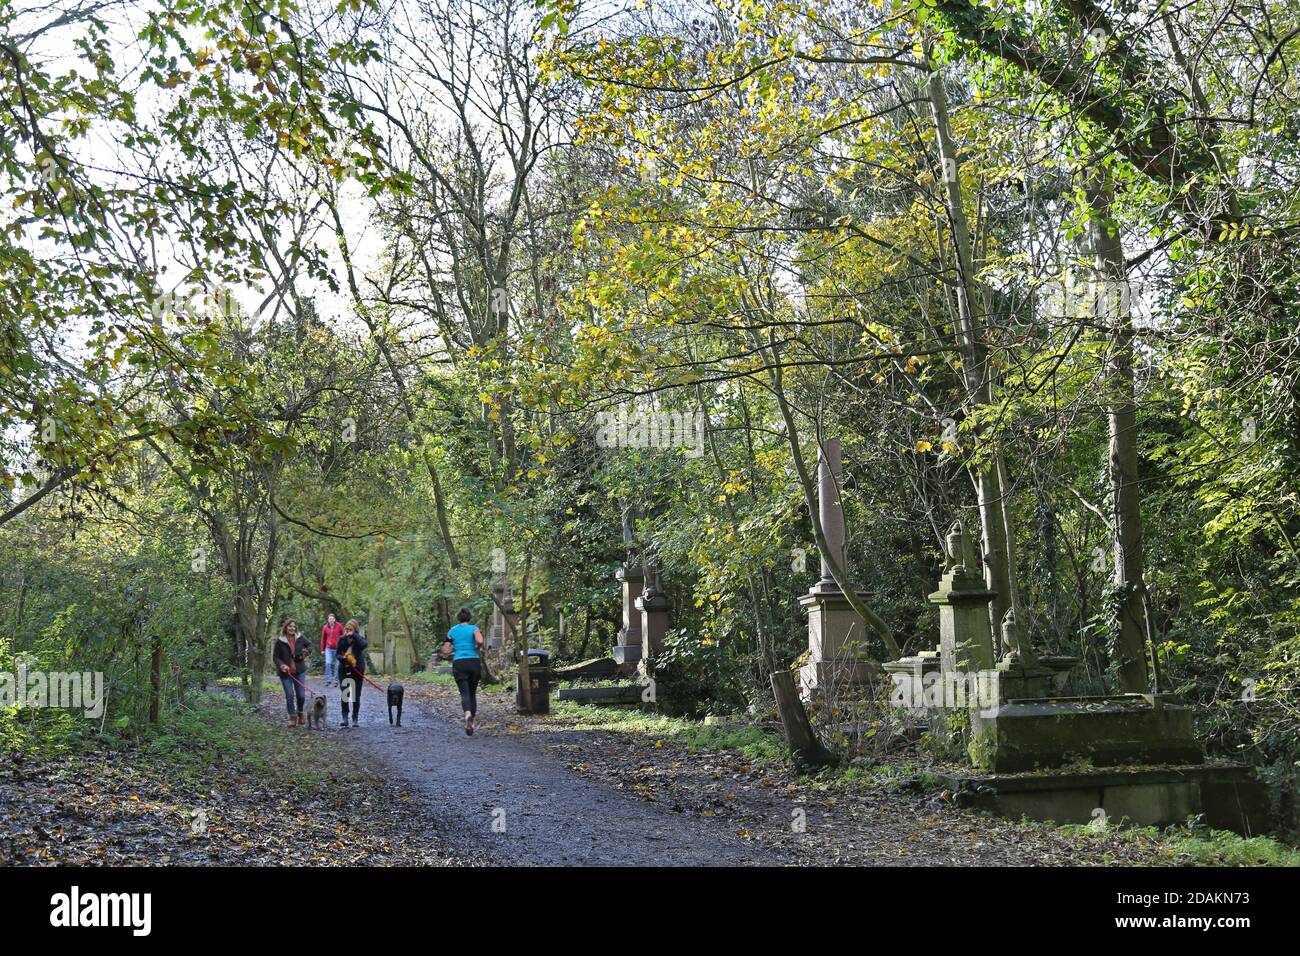 Dog walkers and runners in Nunhead Cemetery, south London, UK. An impressive Victorian cemetery now wild and overgrown, but popular with local people. Stock Photo